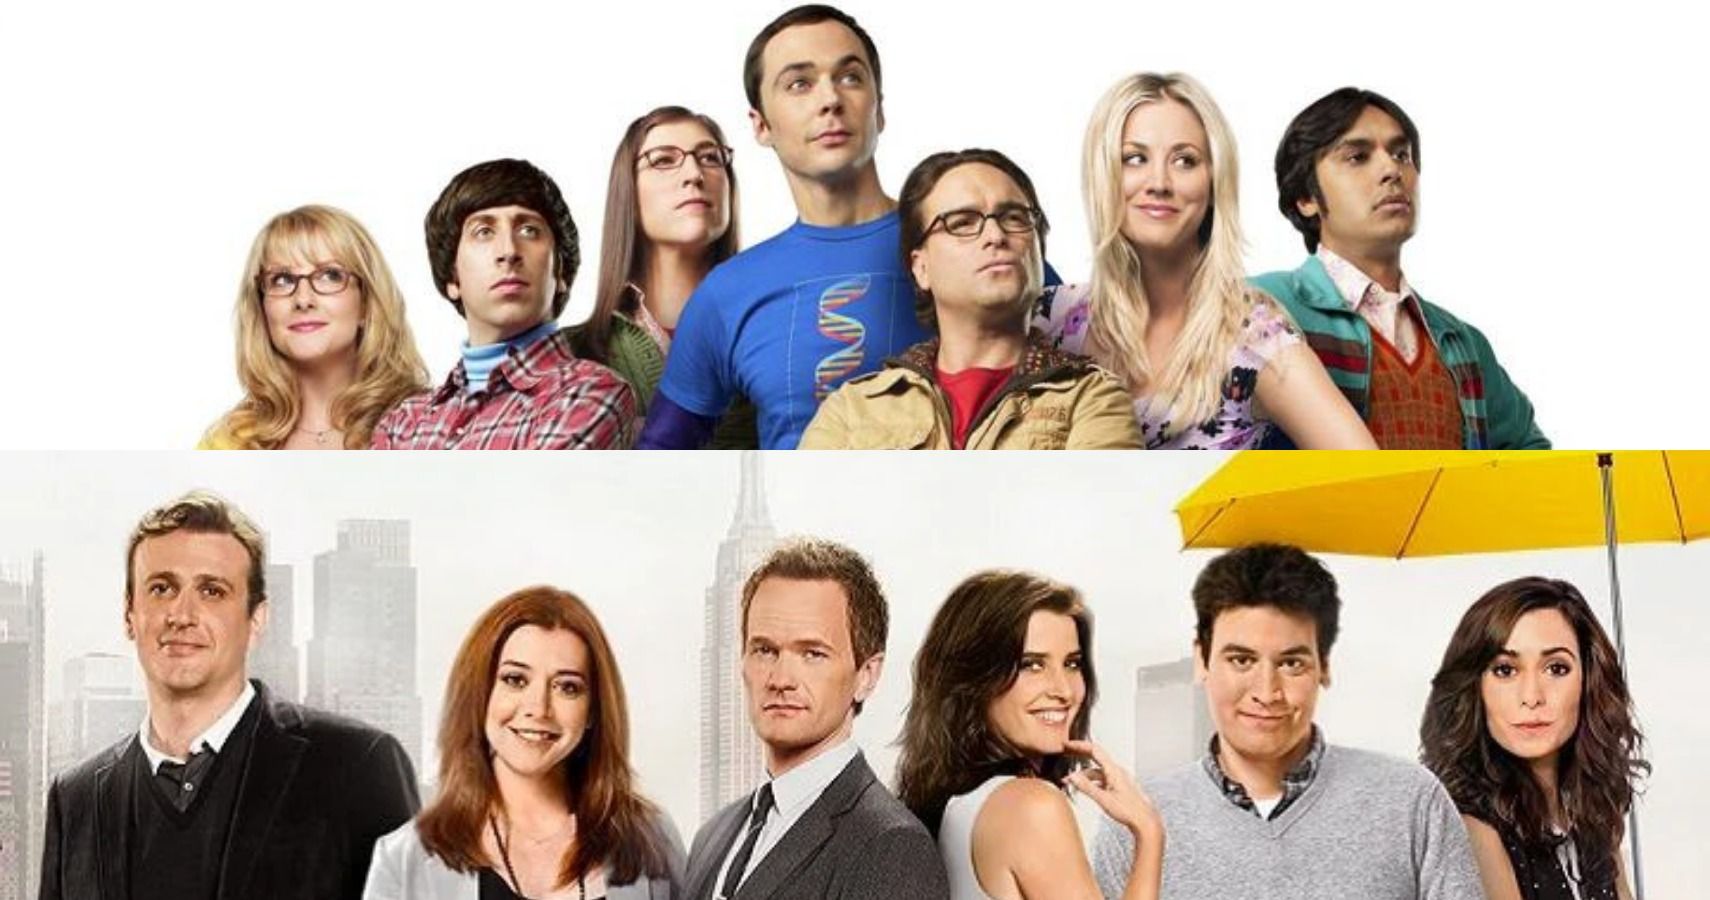 The Big Bang Theory or Friends: Which Is Better?